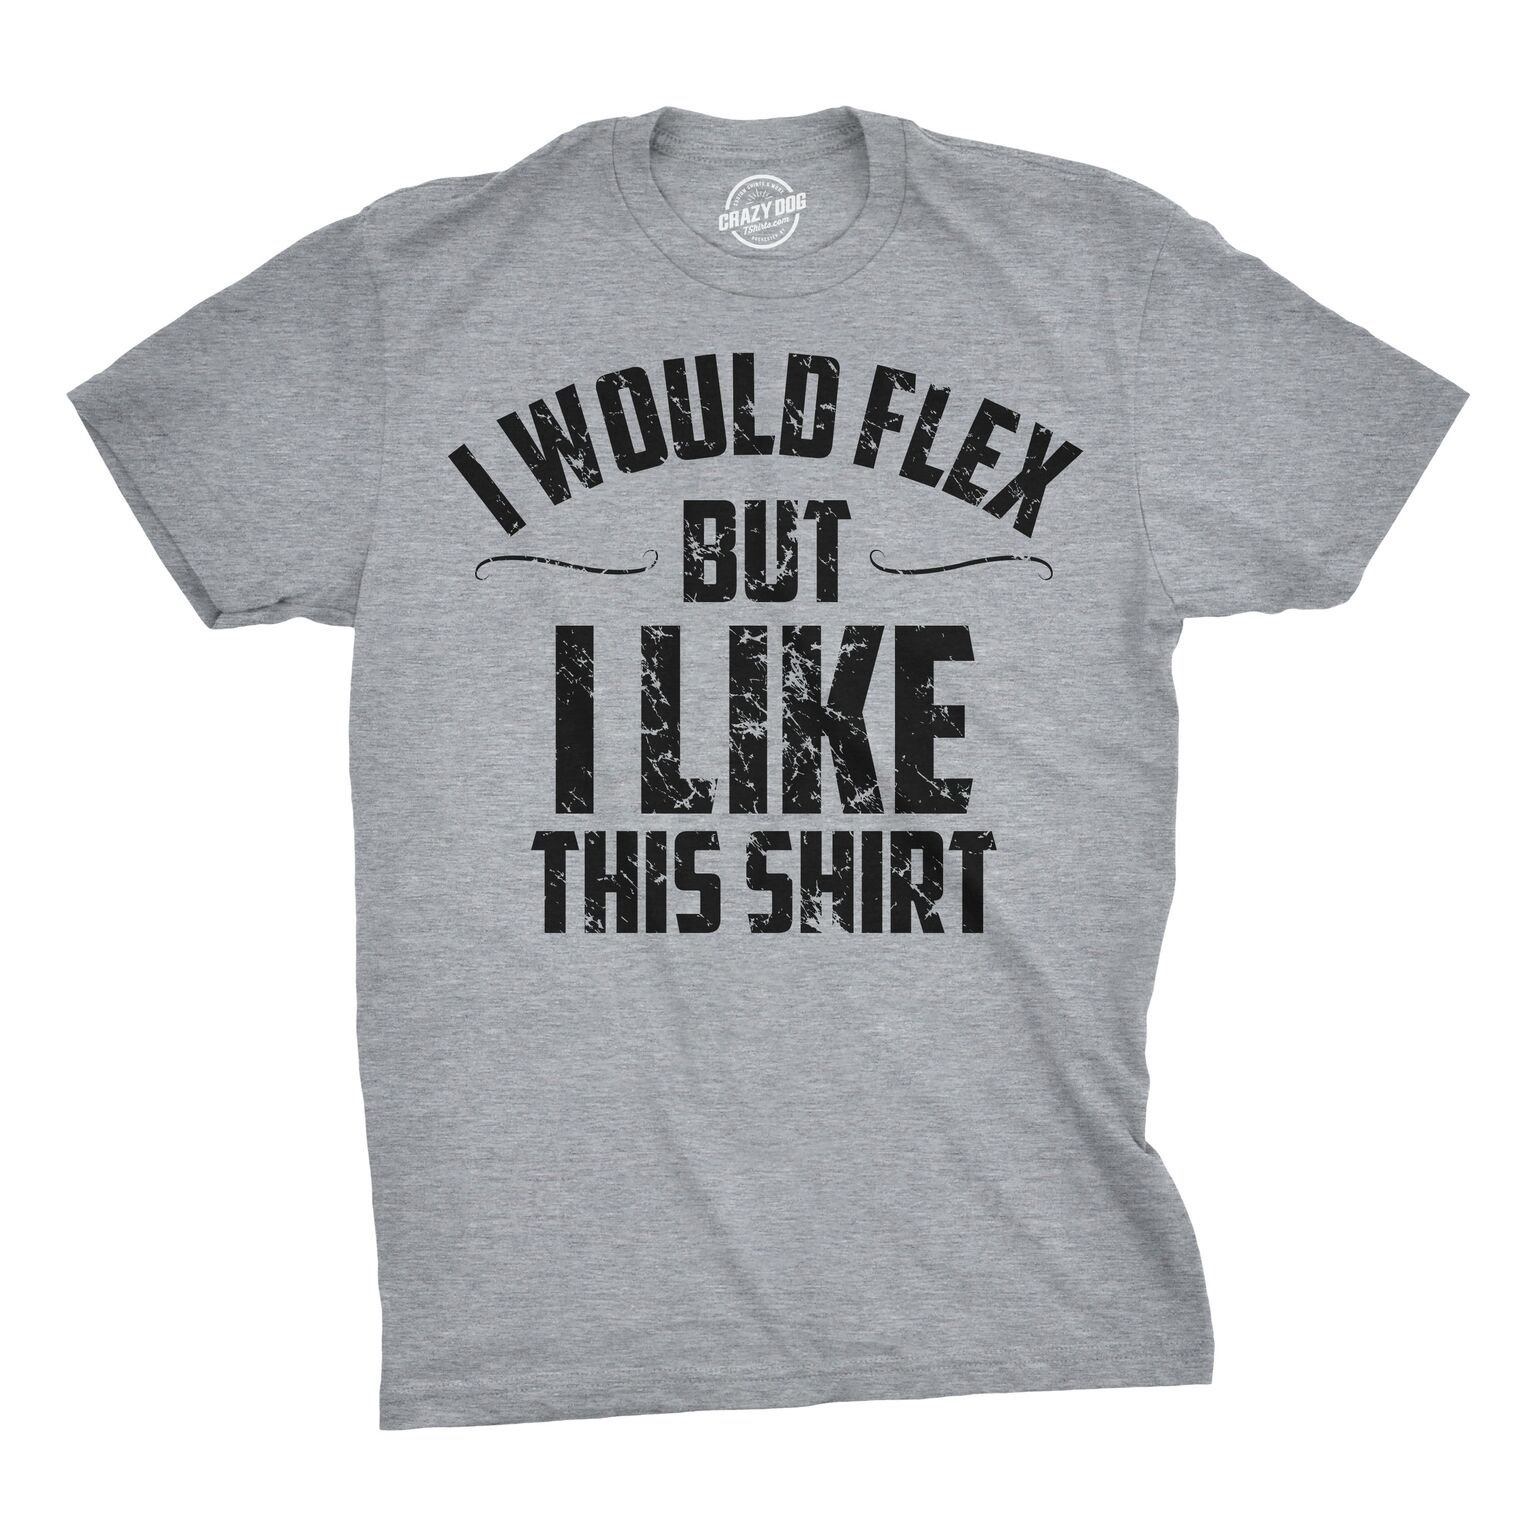 workout shirts with funny sayings